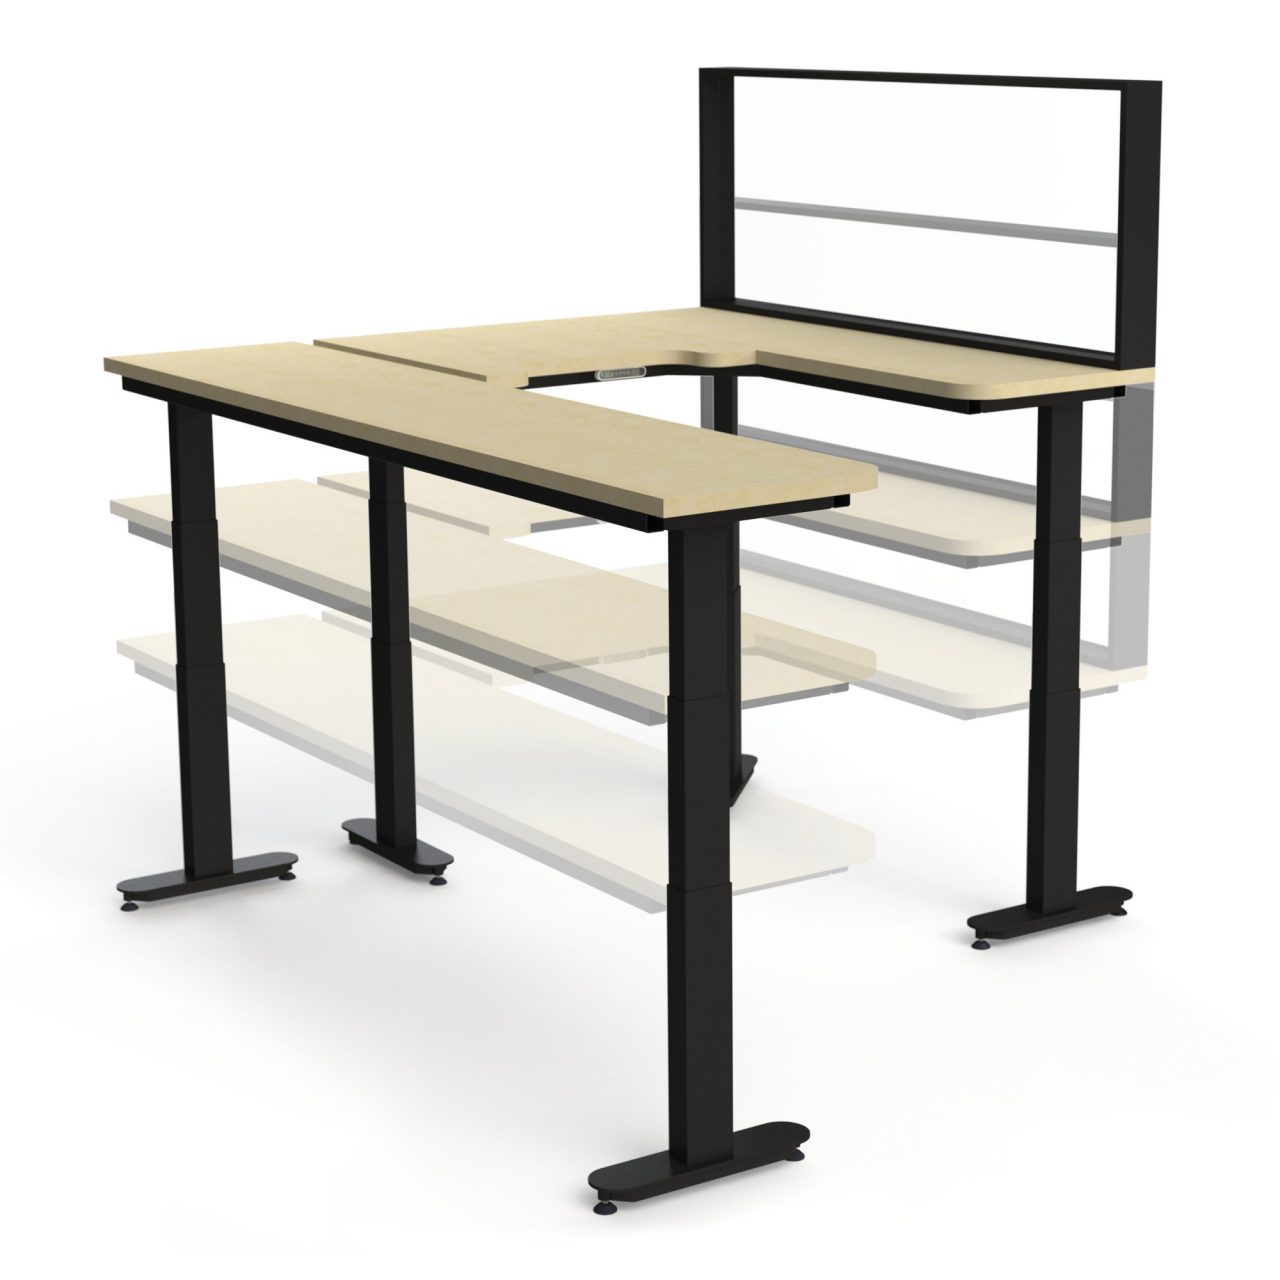 Reception stations, sampling stations, and other tailor-made adjustable stations.